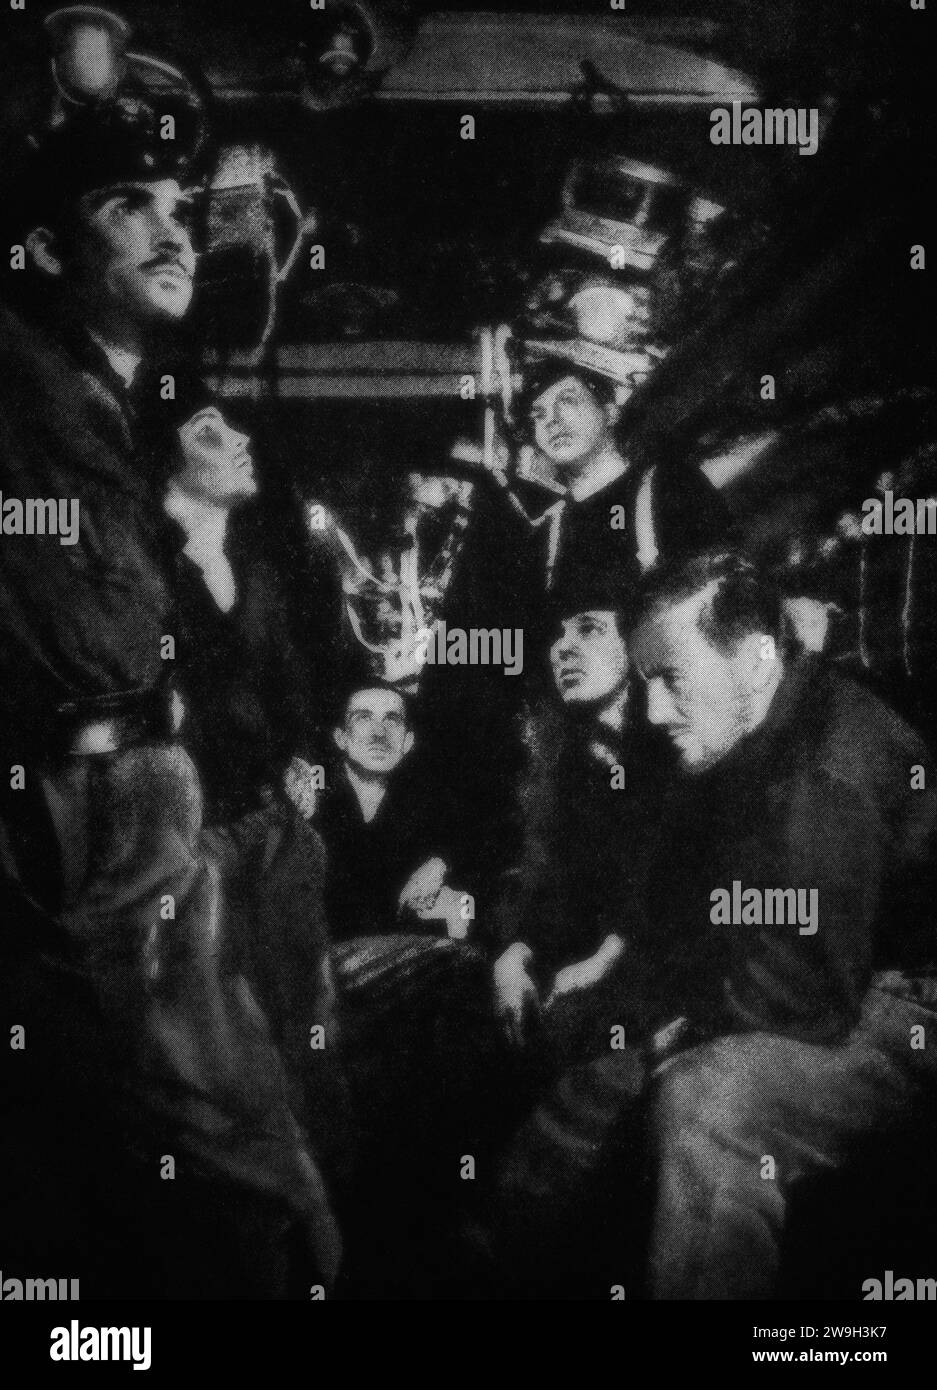 The concern on faces of a German U-Boat crew as they wait depth charges dropped from a destroyer on Atlantic convoy escort duties in February 1943, during the Second World War. Stock Photo